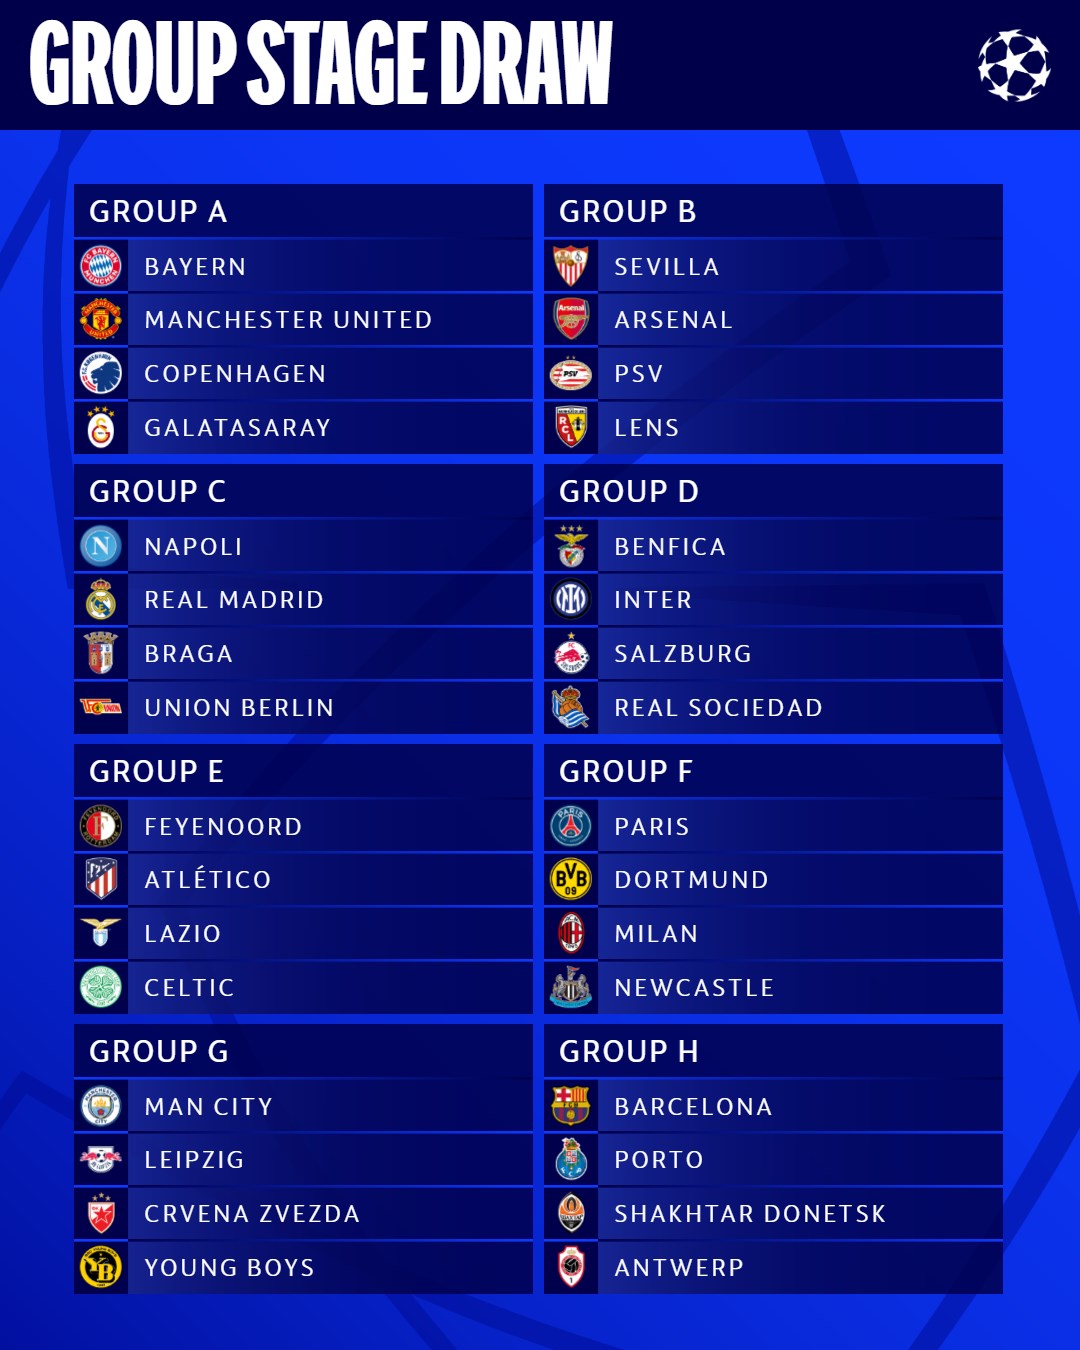 The draw results for the group stage of the Champions League 2023